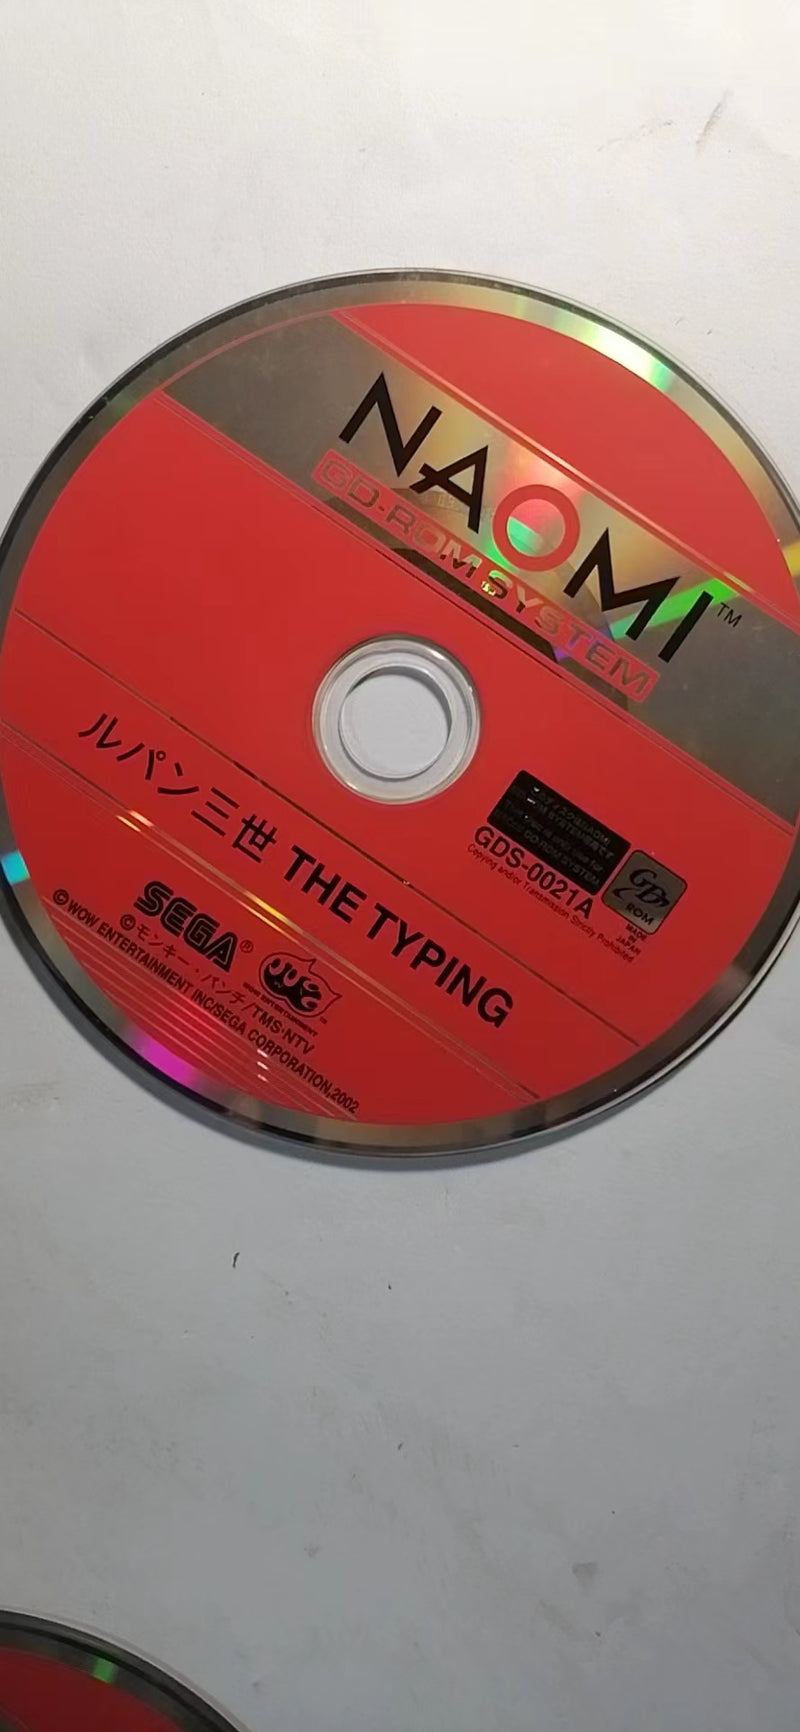 NAOMI  Lupin 3 : The Typing disc only